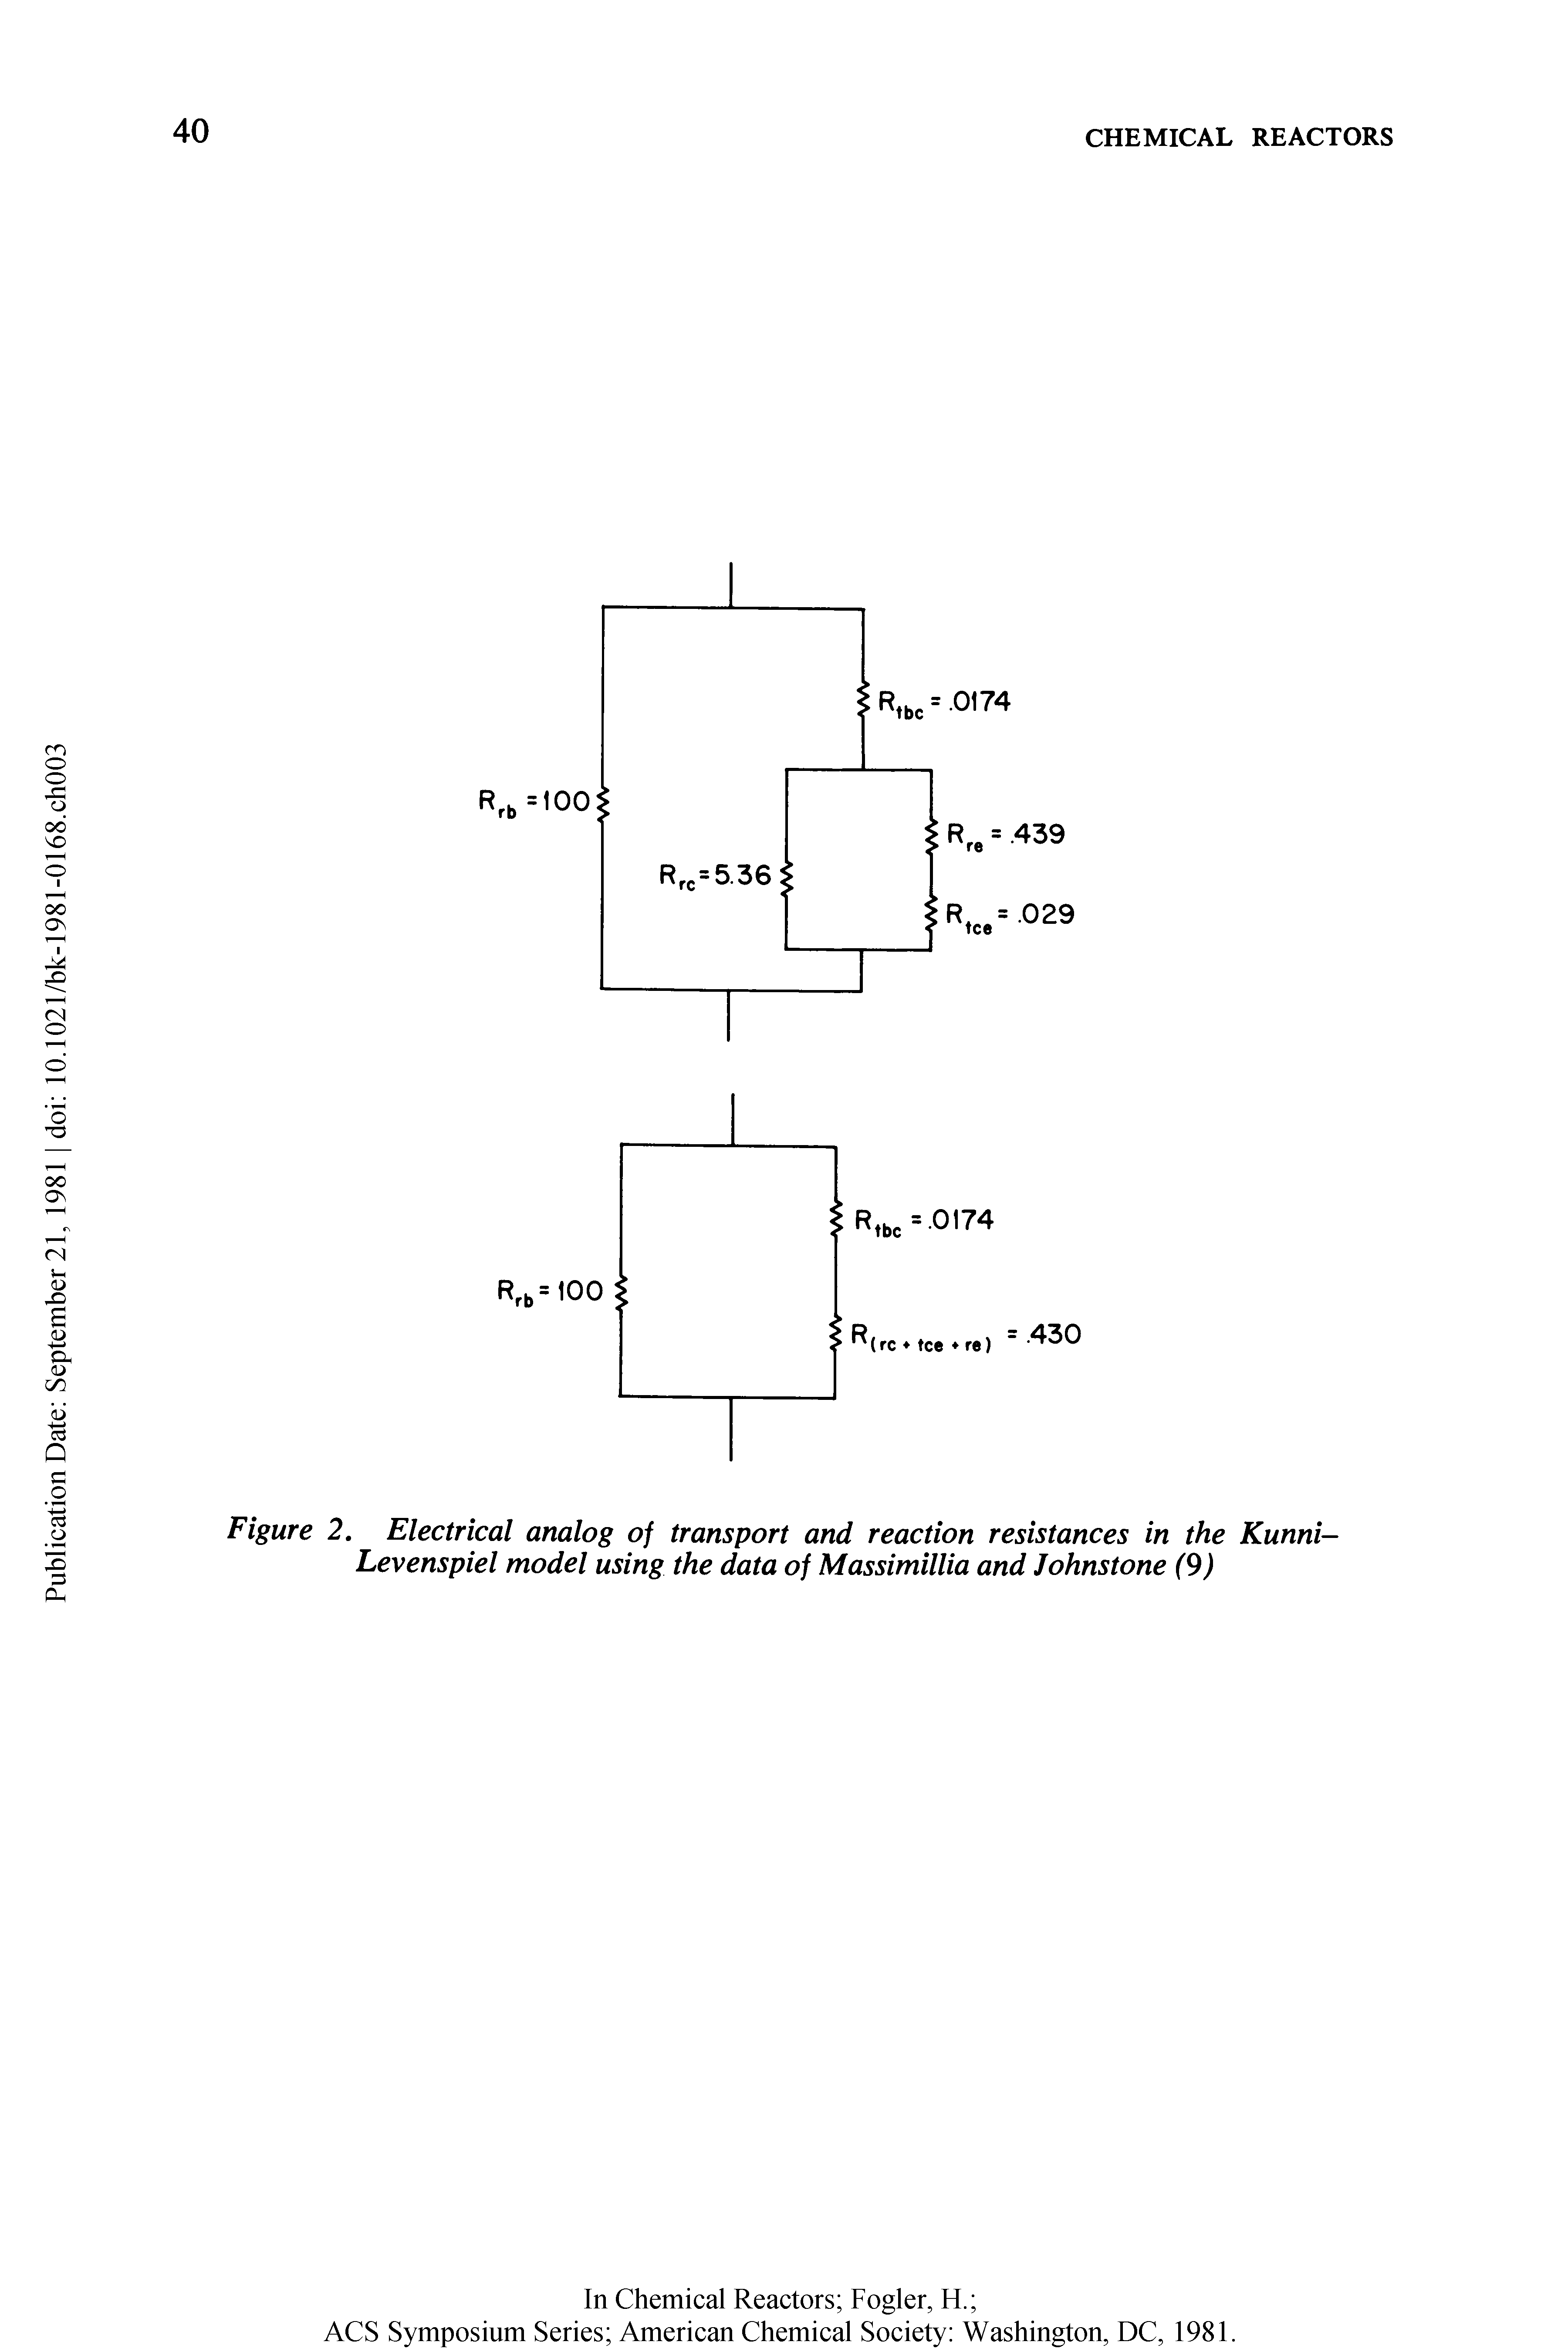 Figure 2. Electrical analog of transport and reaction resistances in the Kunni-Levenspiel model using the data of Massimillia and Johnstone (9)...